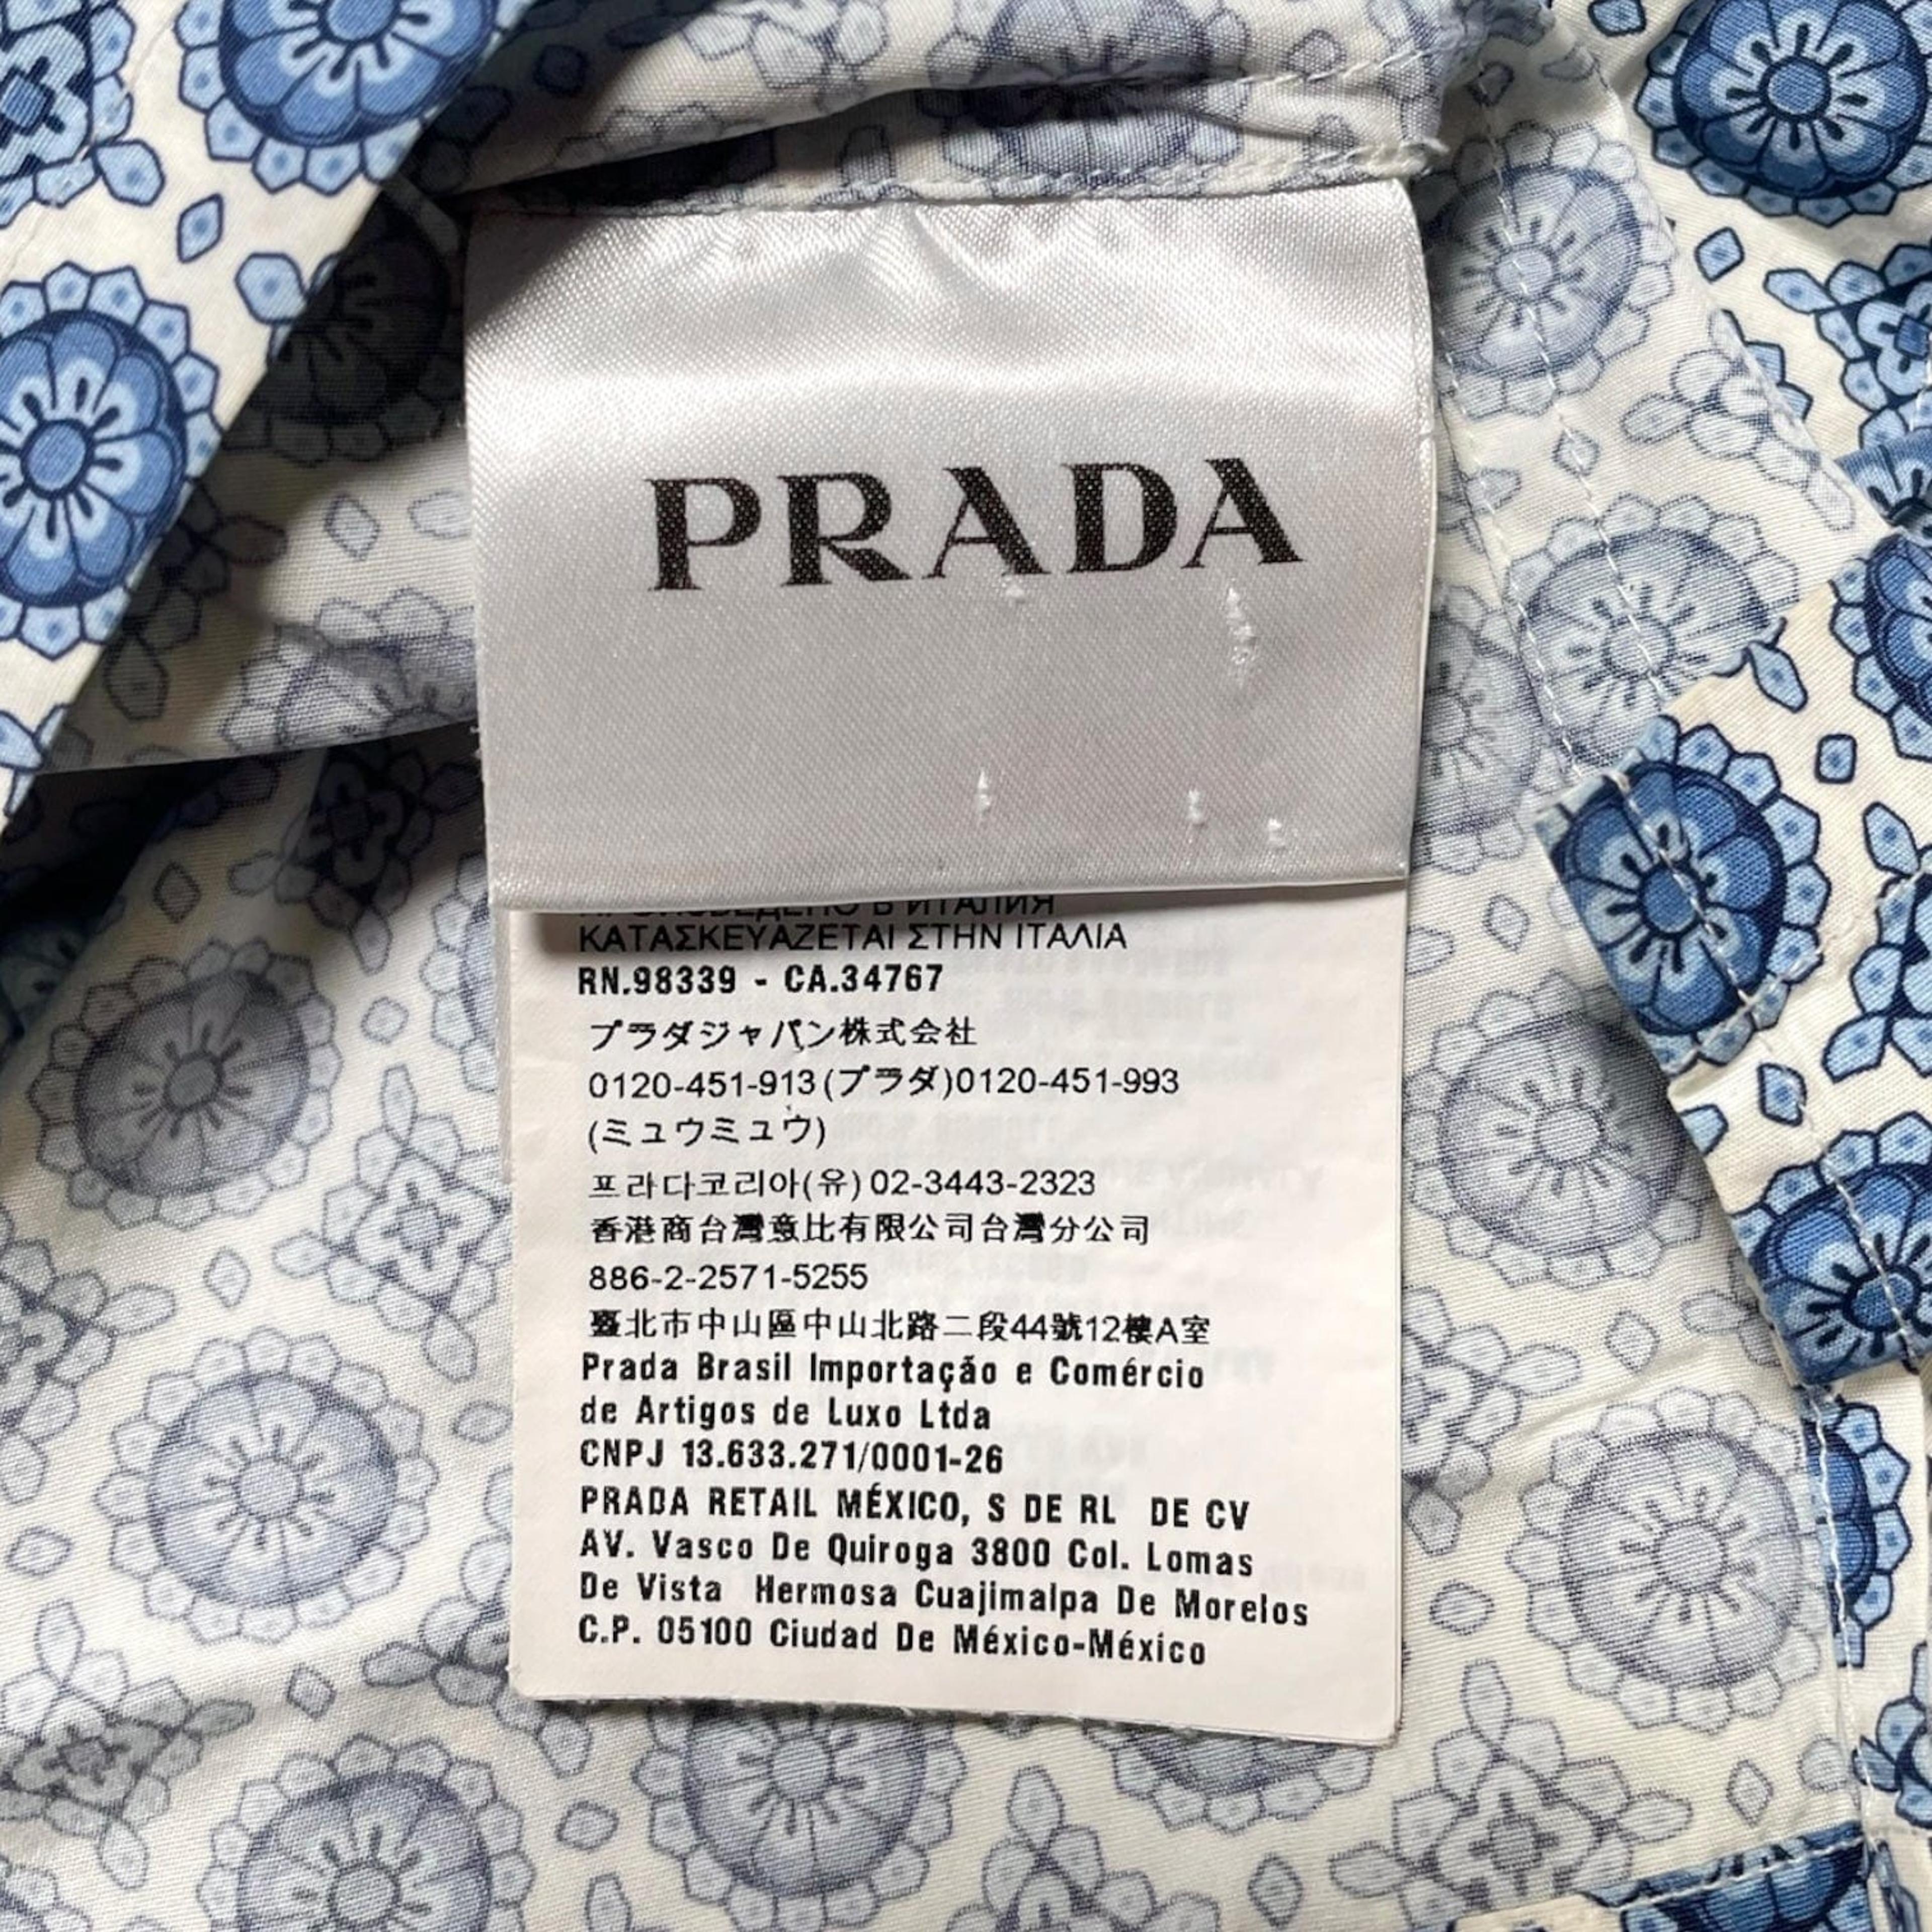 Alternate View 4 of Prada Textile Short Sleeve Button Up Shirt White Blue Pre-Owned